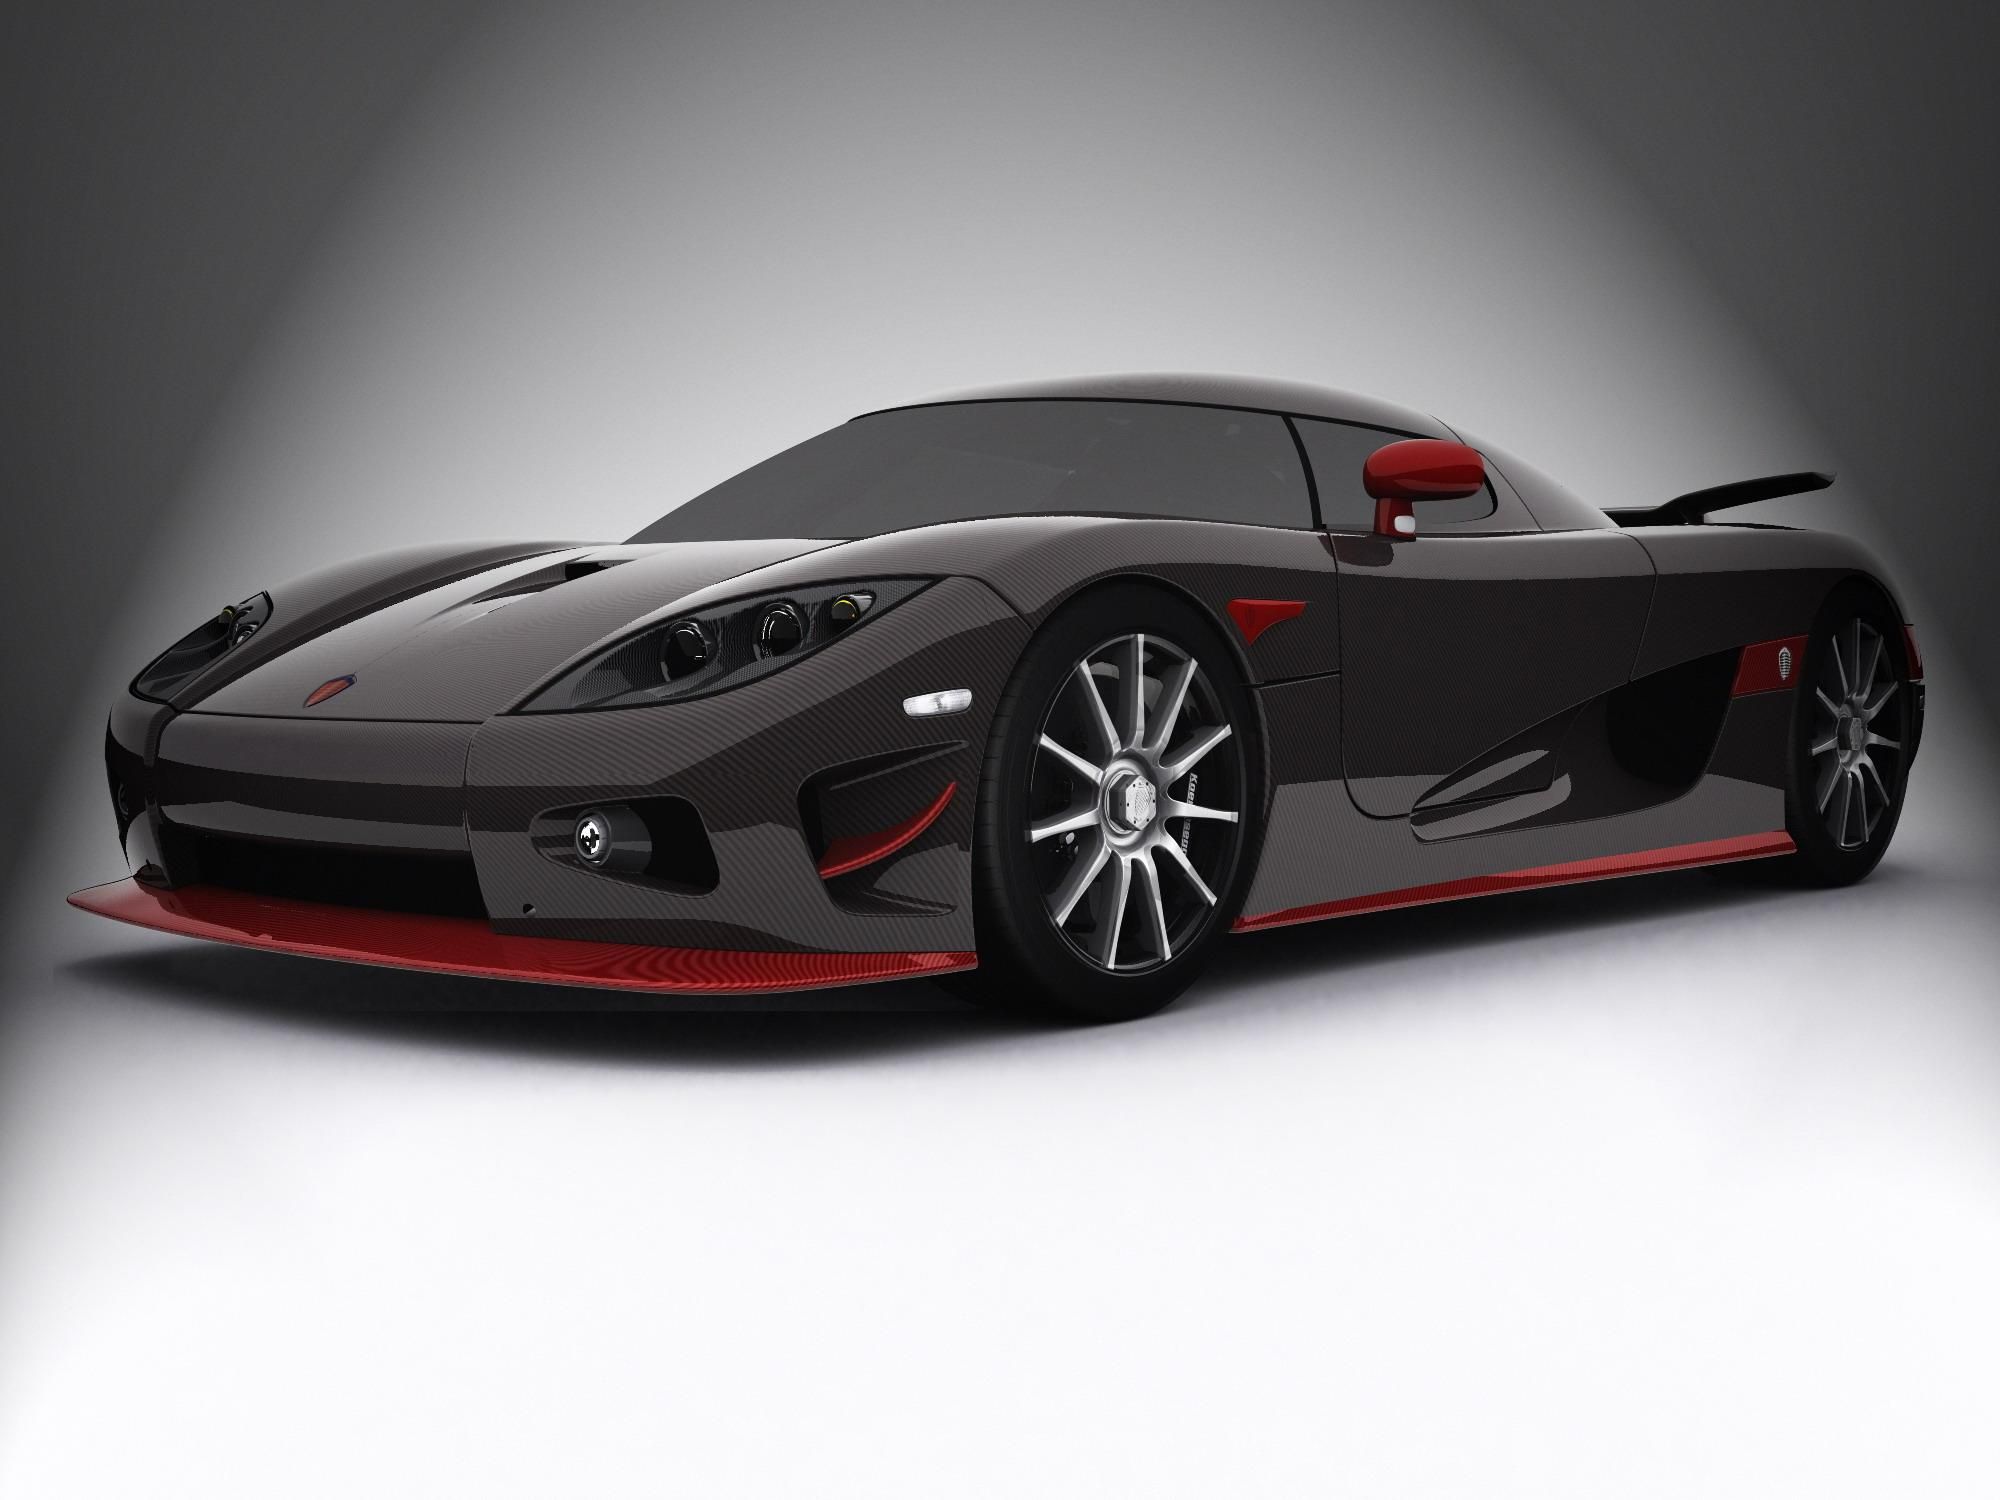 2007 Koenigsegg CCX and CCXR Limited Editions